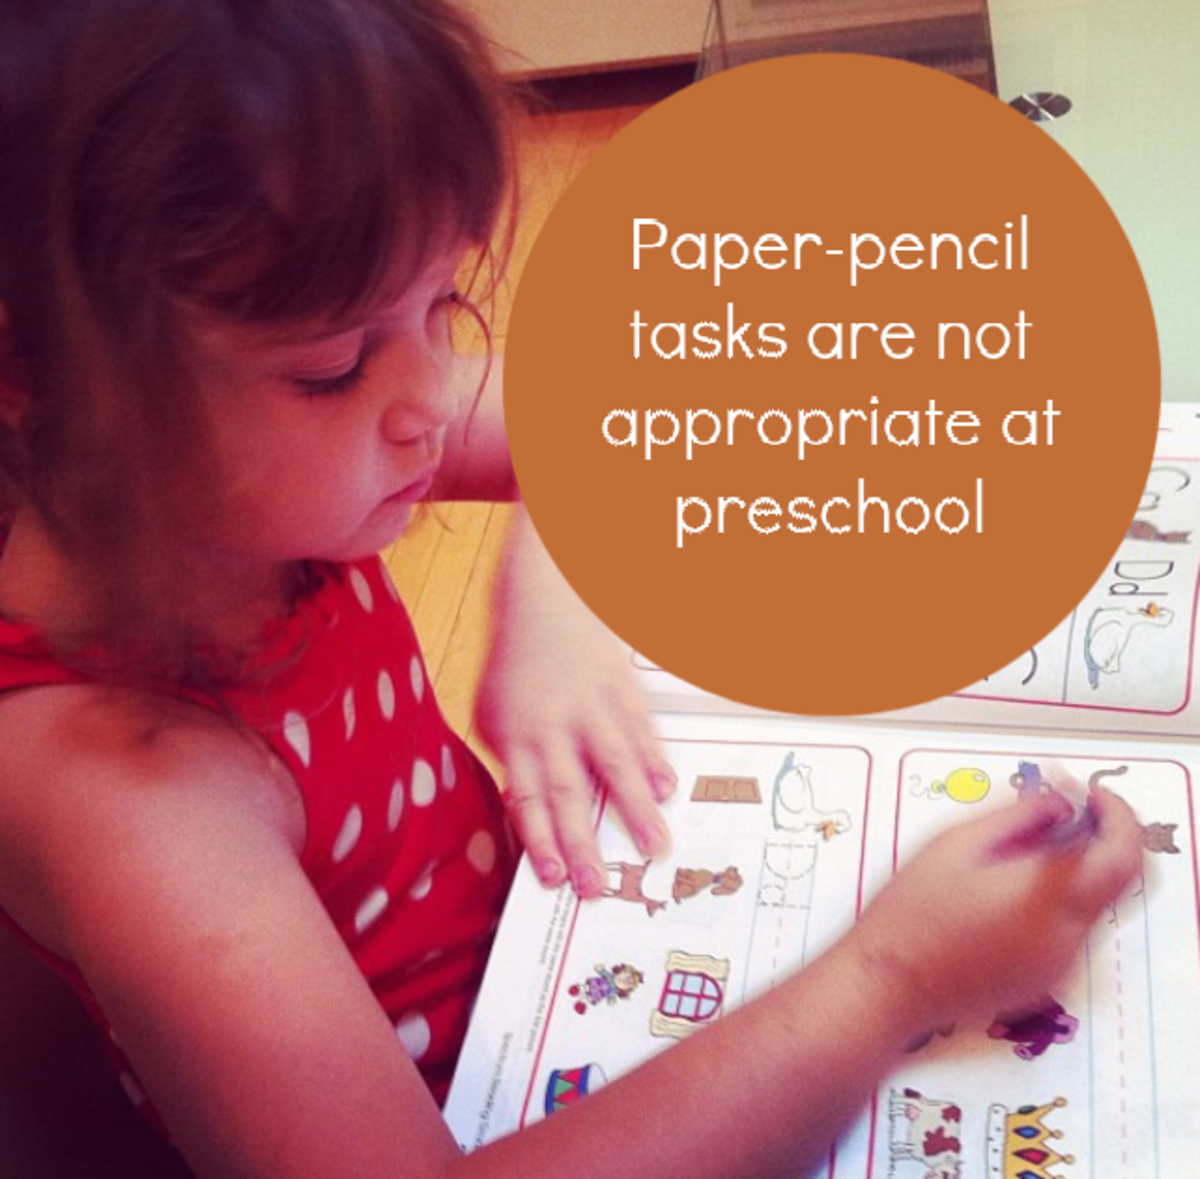 Parents should be wary of paper-pencil tasks, long circle times, computers, and an academic focus.